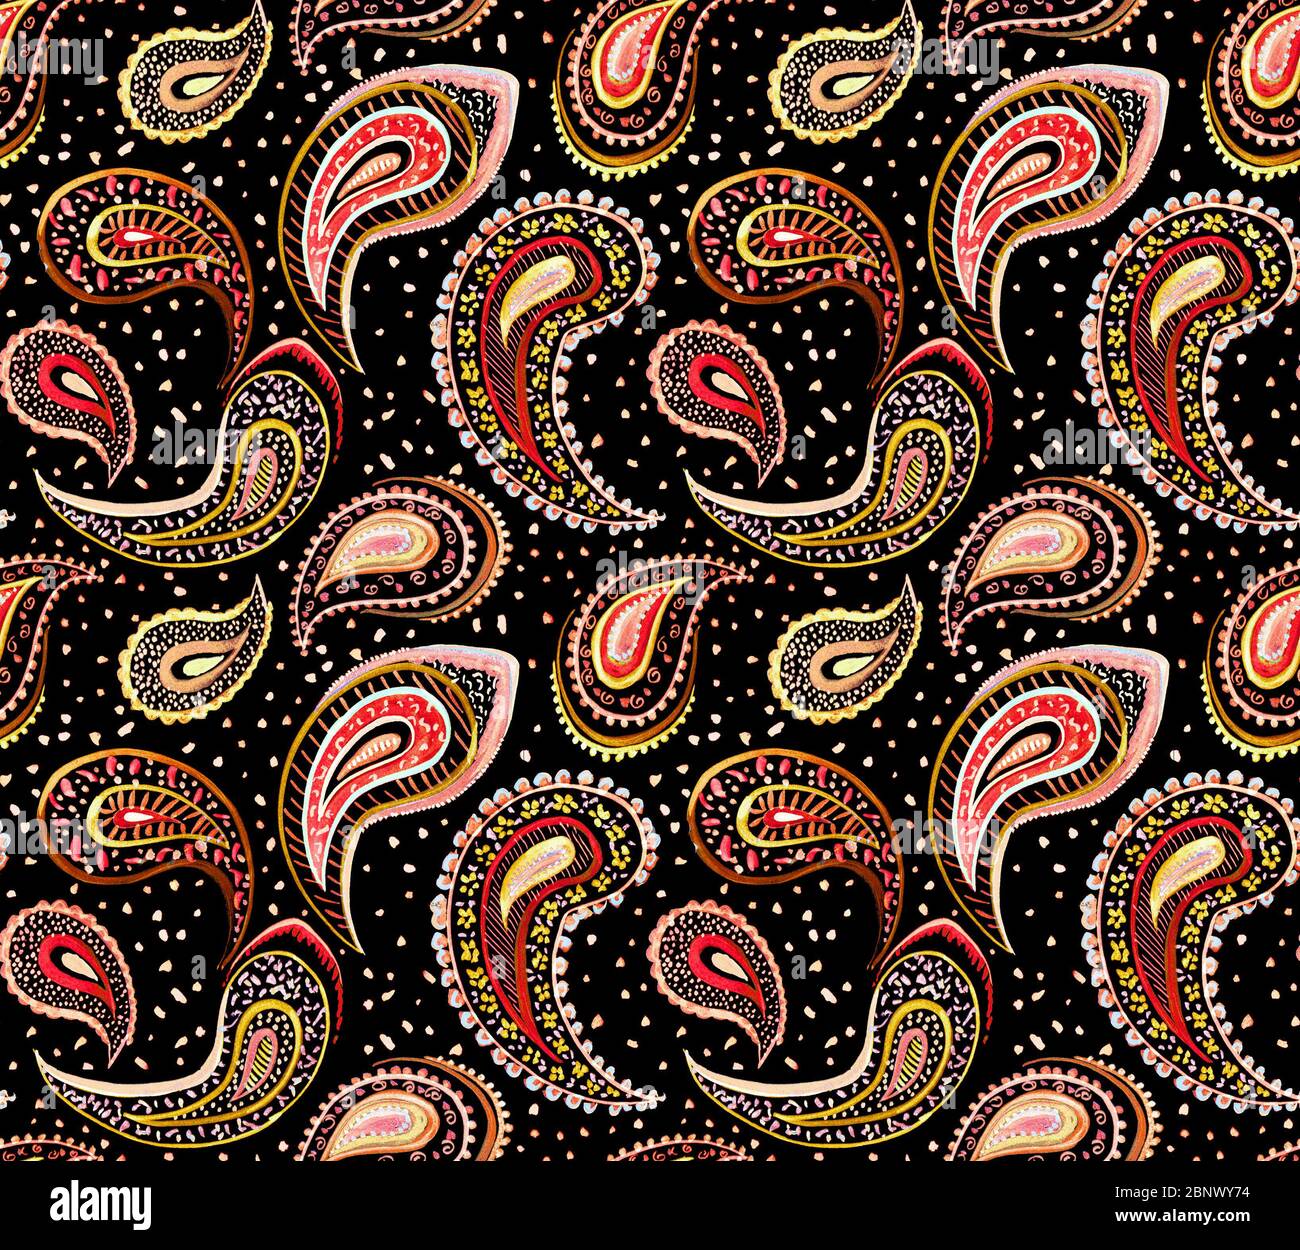 Seamless decorative paisley pattern with black background Ready for textile prints. Stock Photo